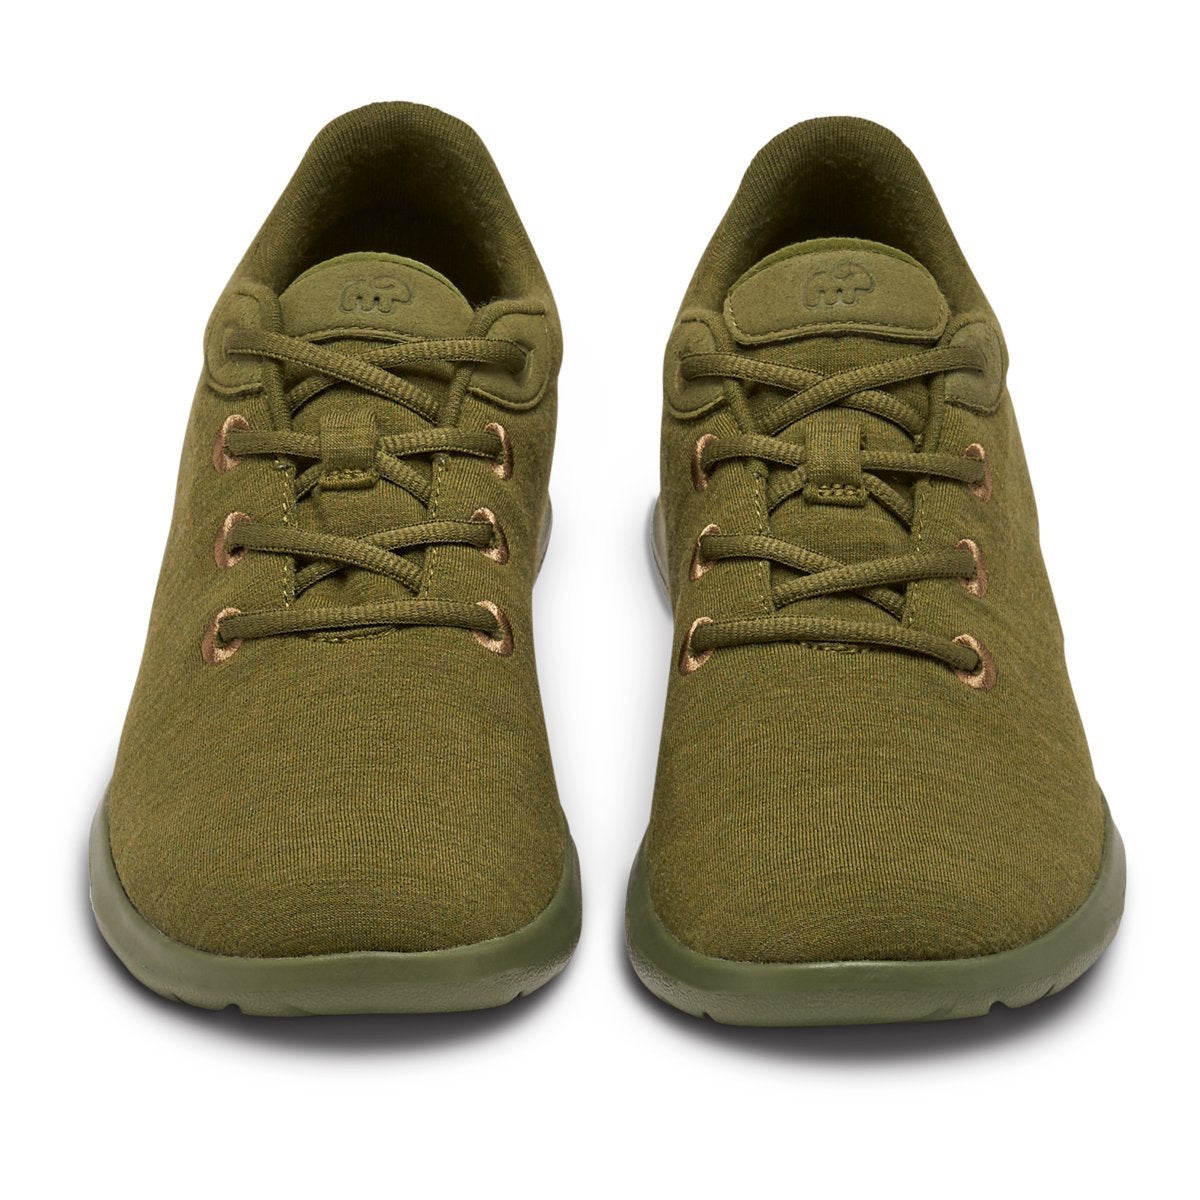 Men's Lace-Ups Olive Green